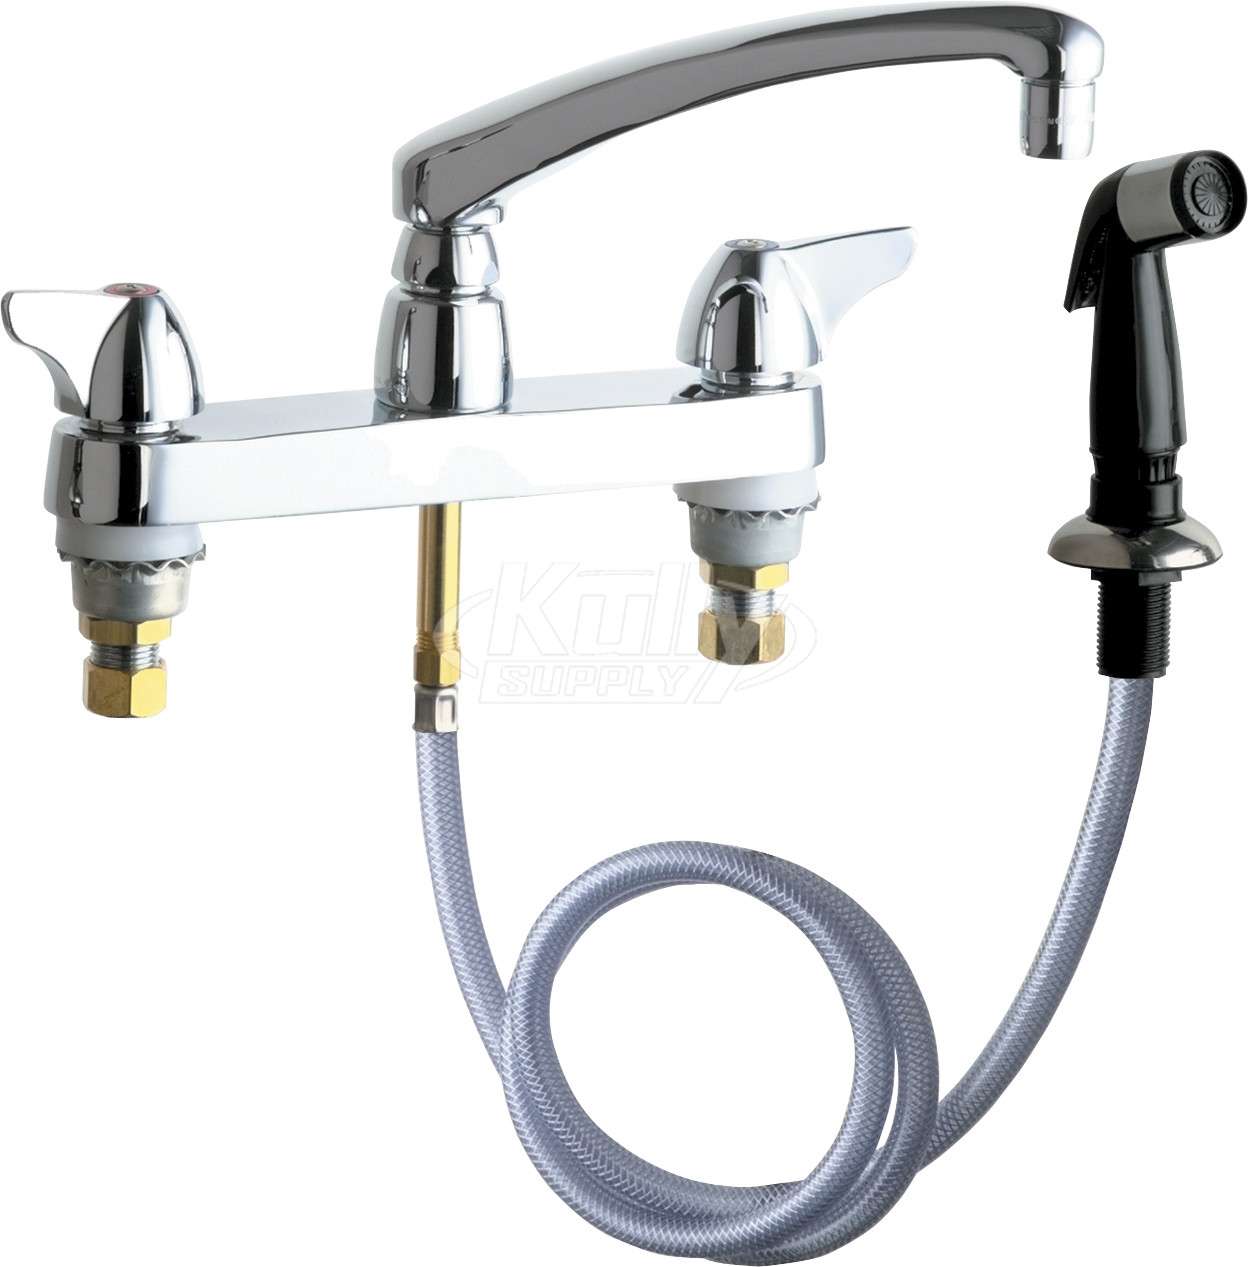 Chicago 1102-ABCP Hot and Cold Water Sink Faucet with Side Spray